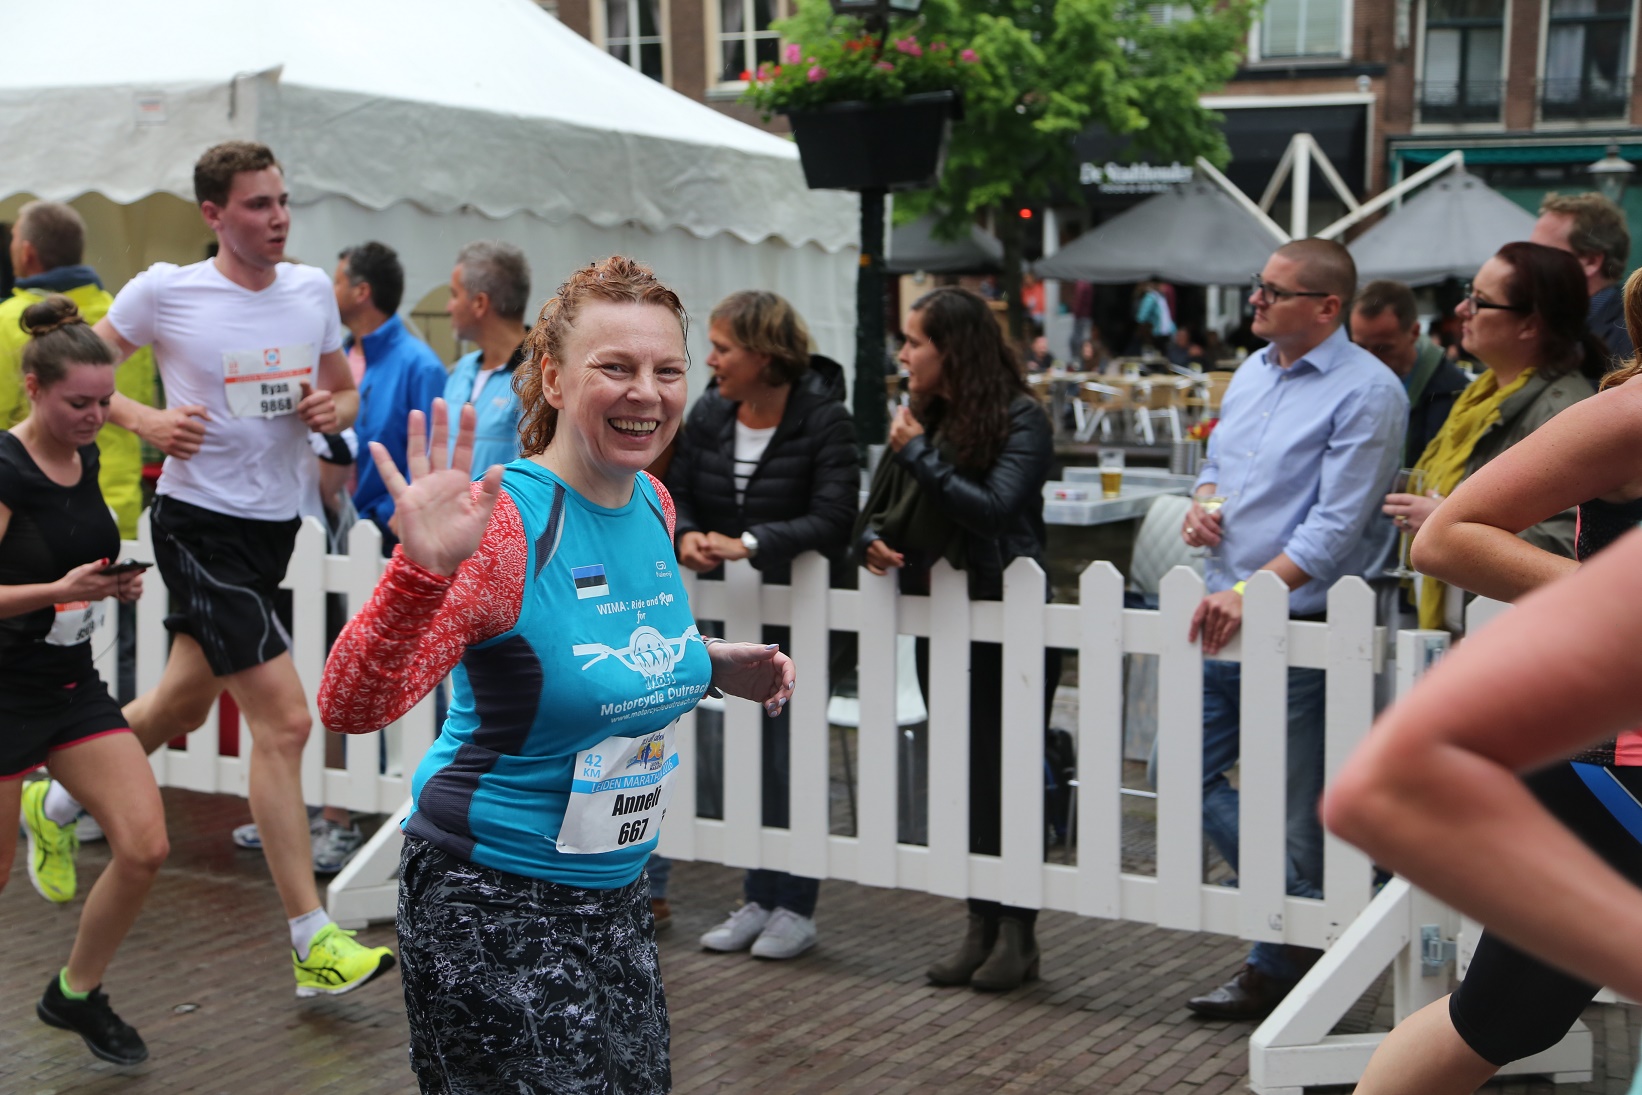 Anneli was finishing just behind me